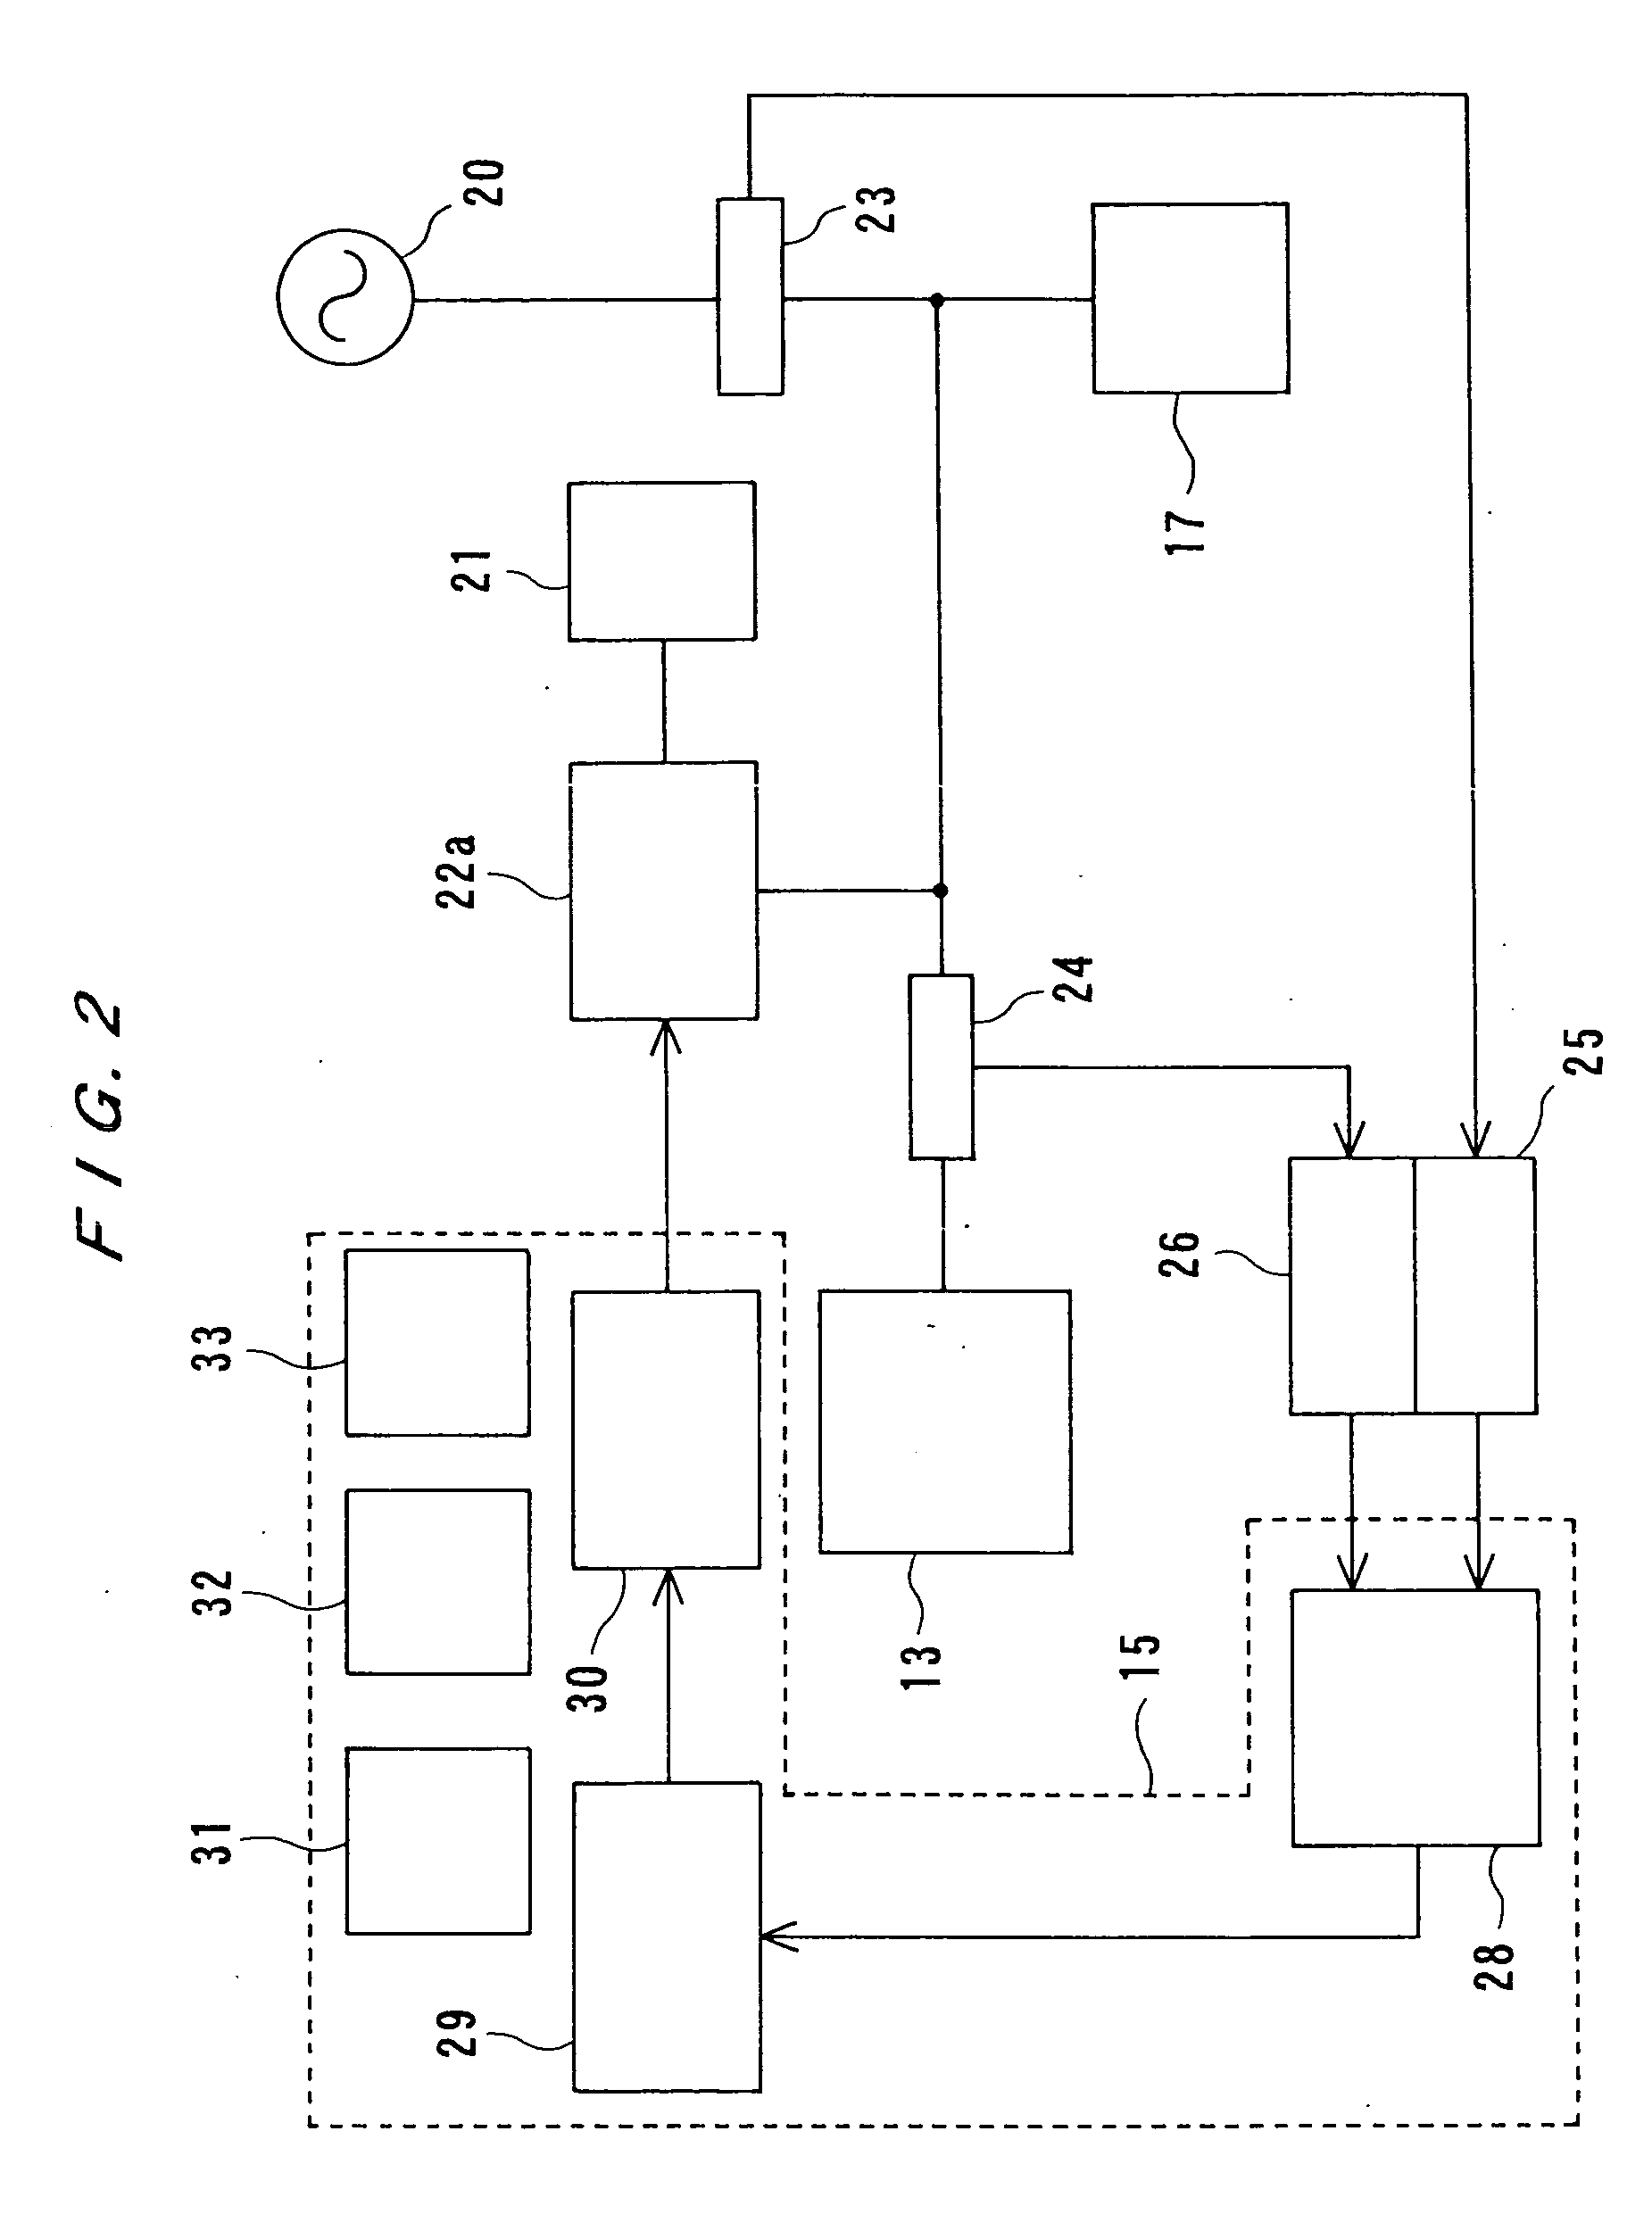 Power supply including system interconnection inverter